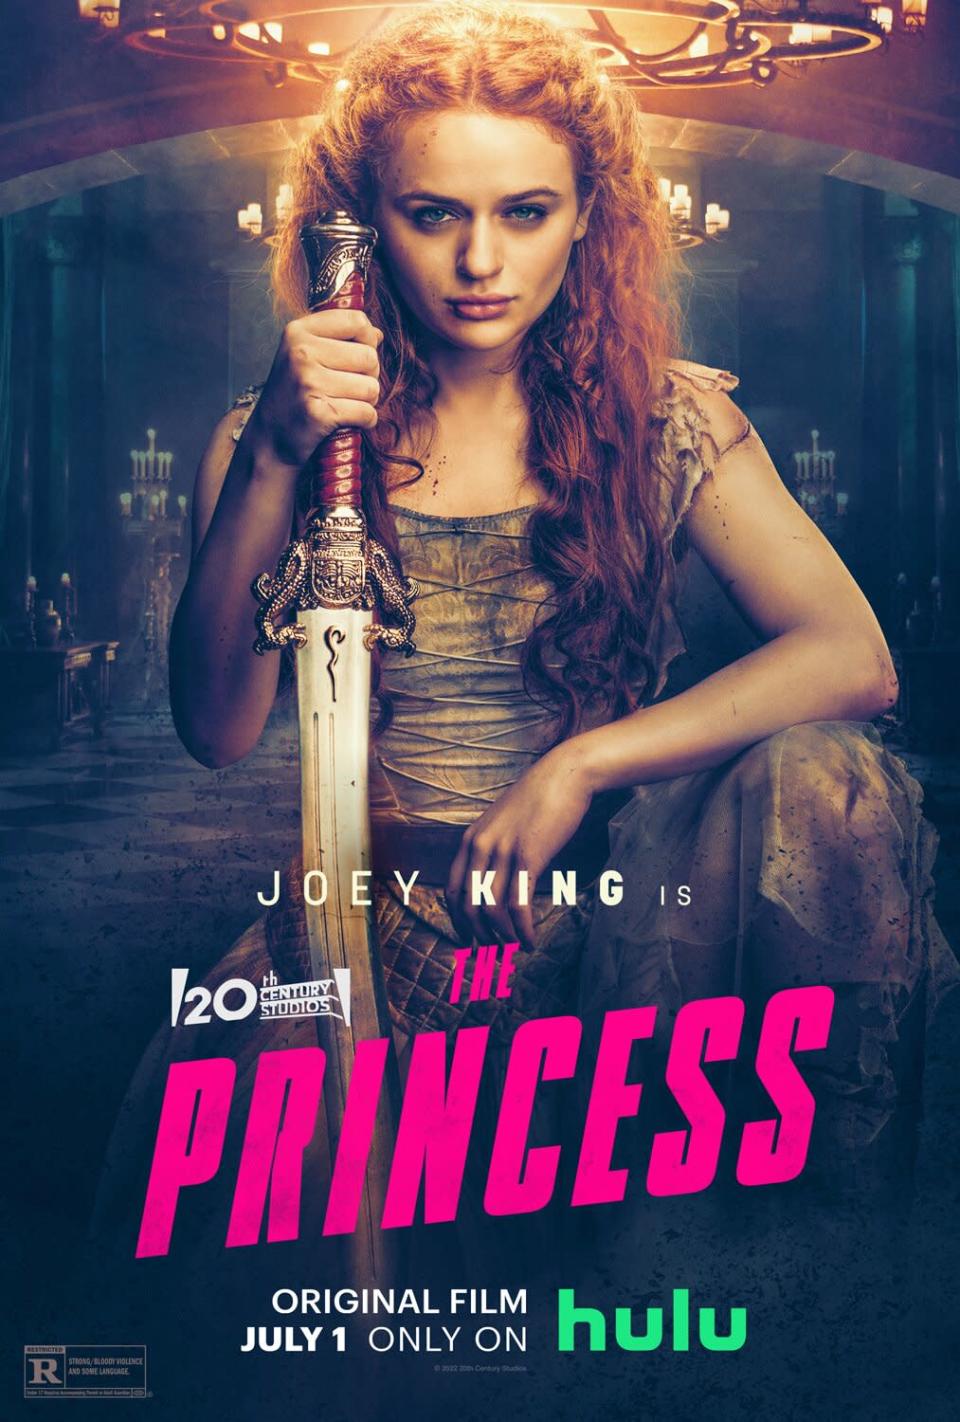 Joey King Fights Back in Action-Packed Trailer for Violent Fairy Tale The Princess